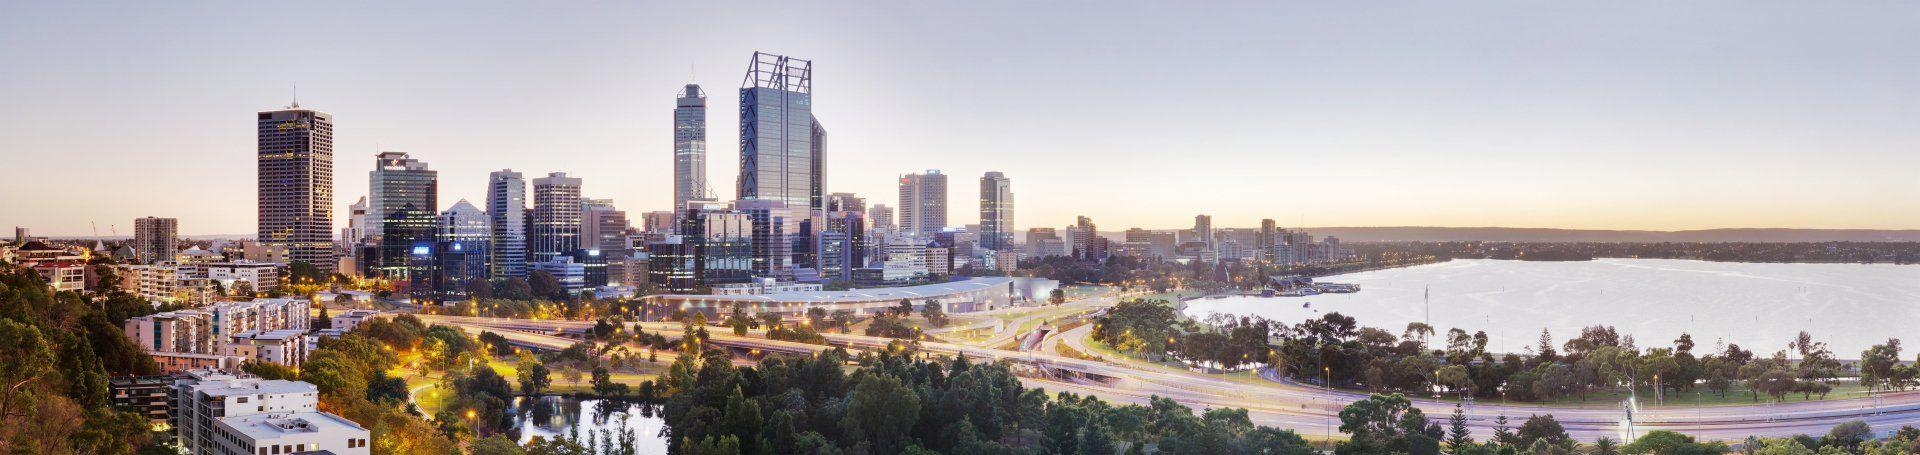 Wallpaper With Sunset Perth City With Building and River - Etsy